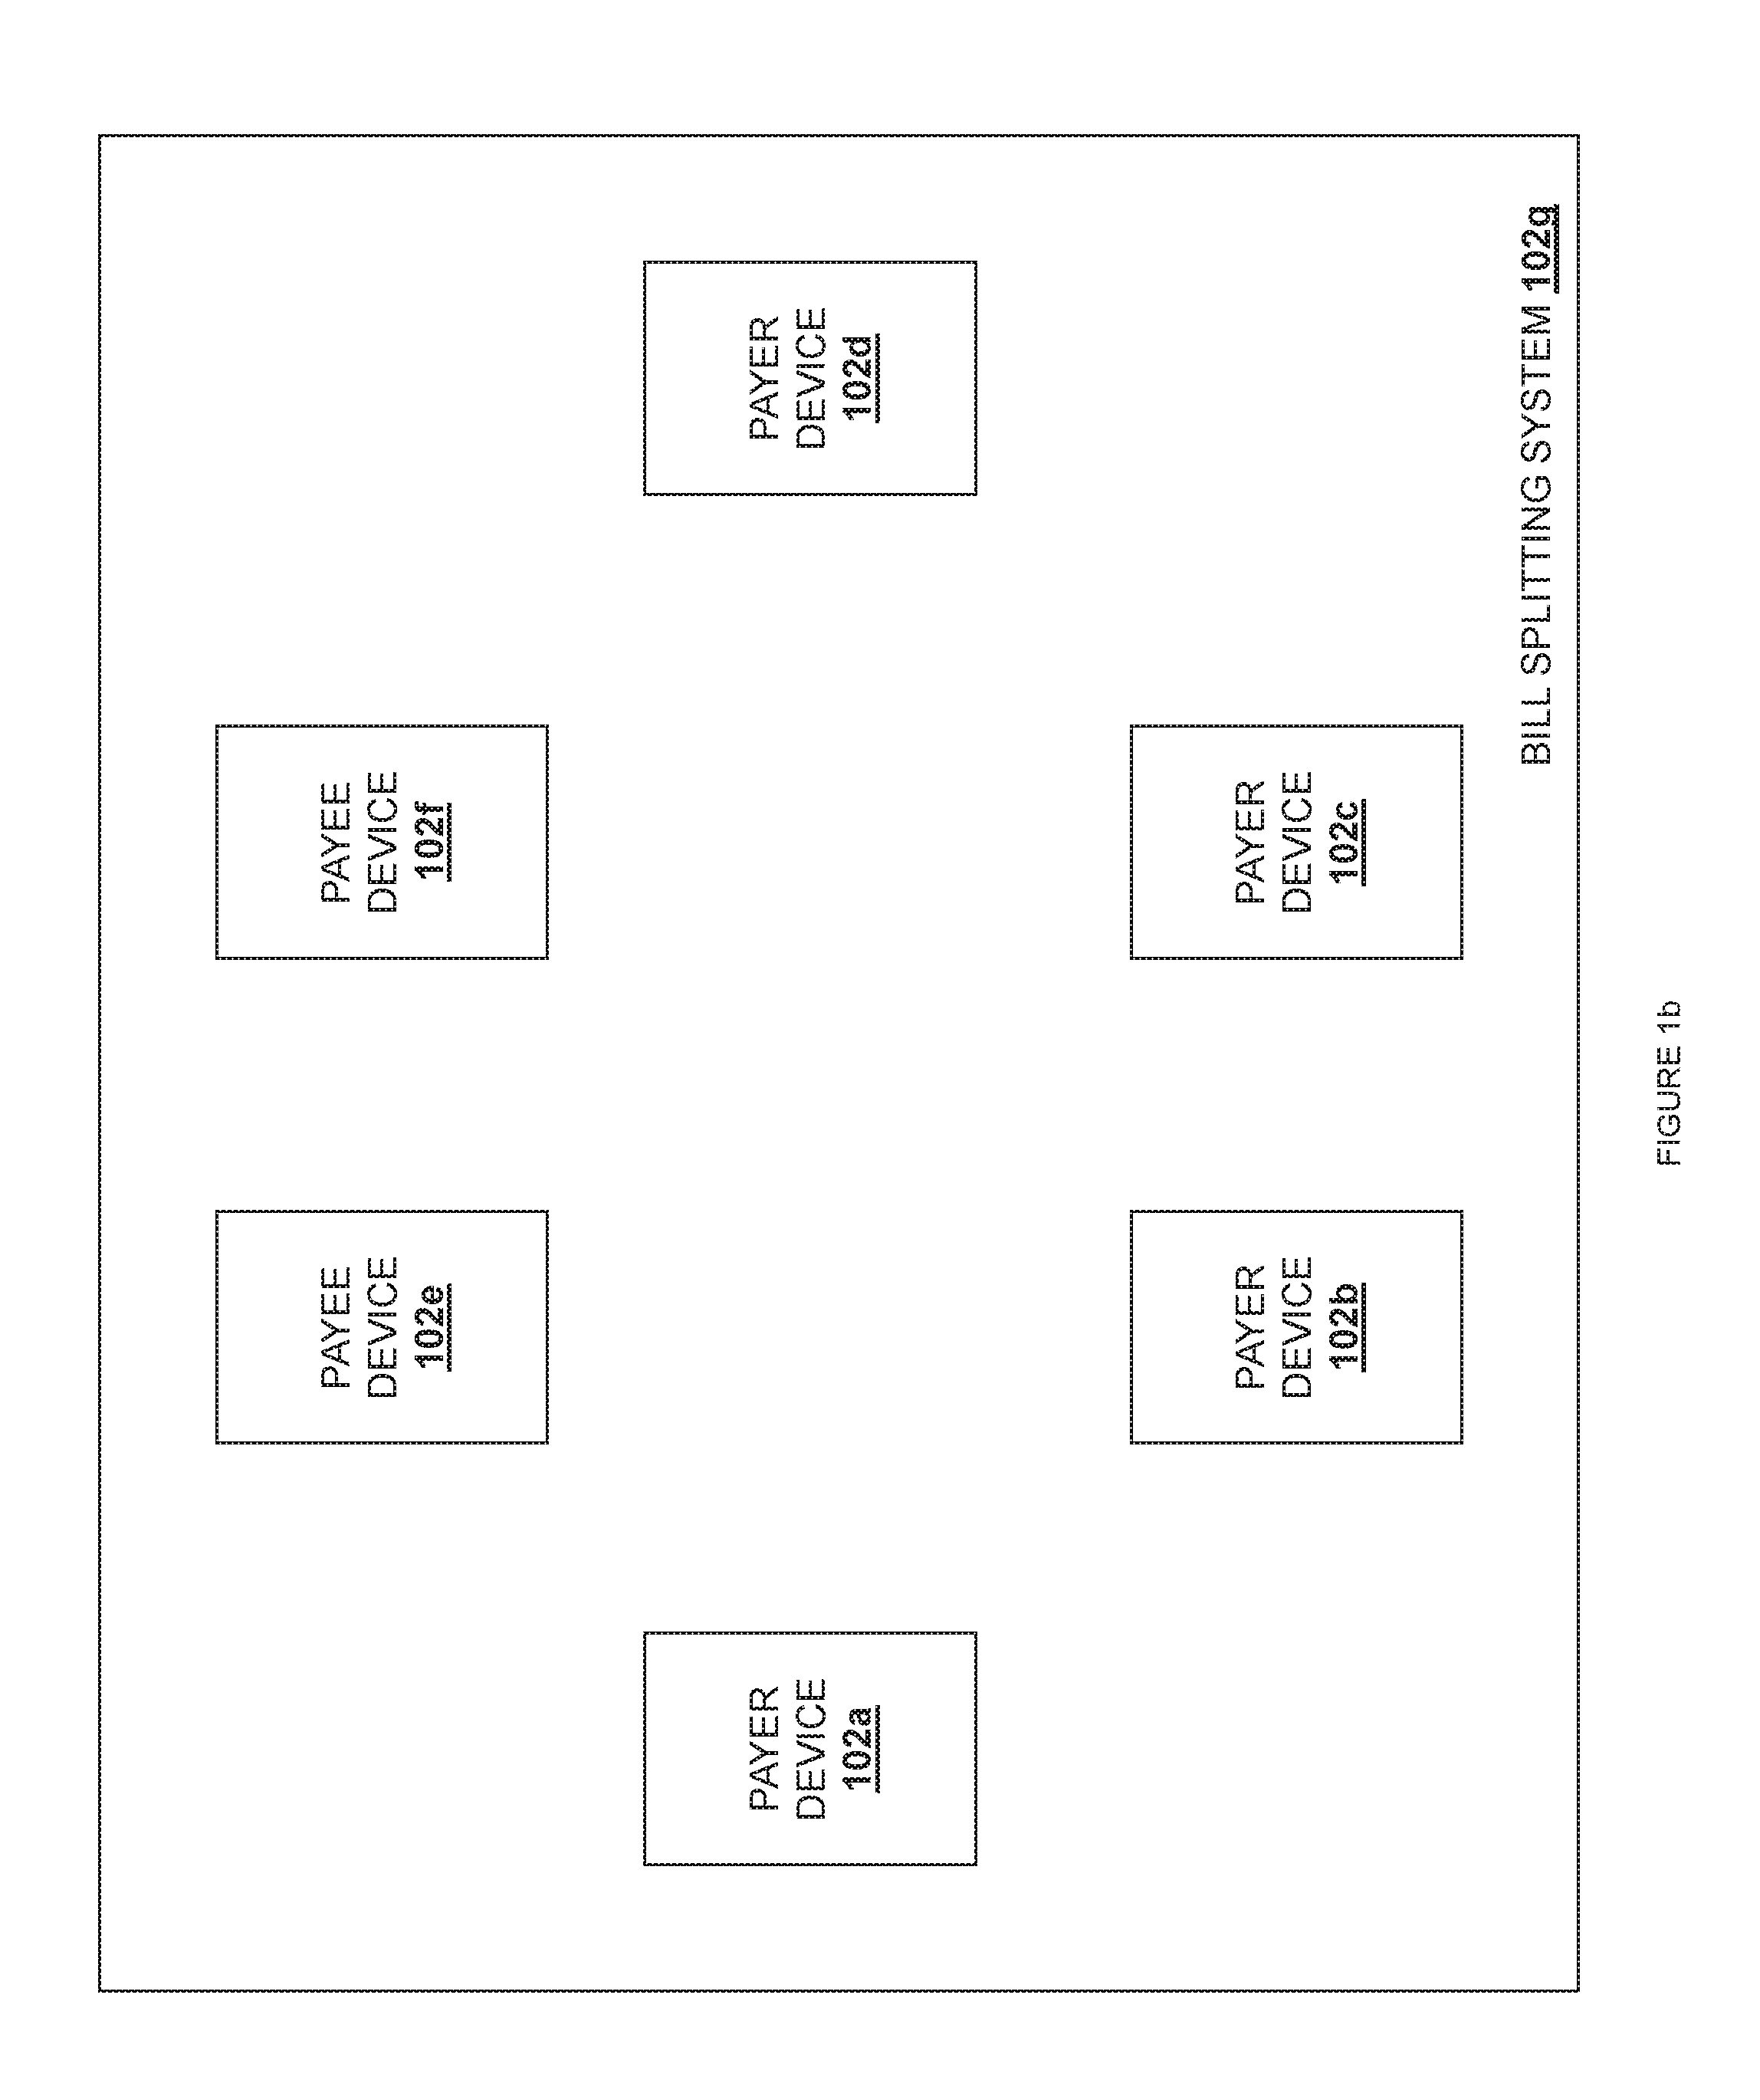 Mobile device nfc-based detection and merchant payment system